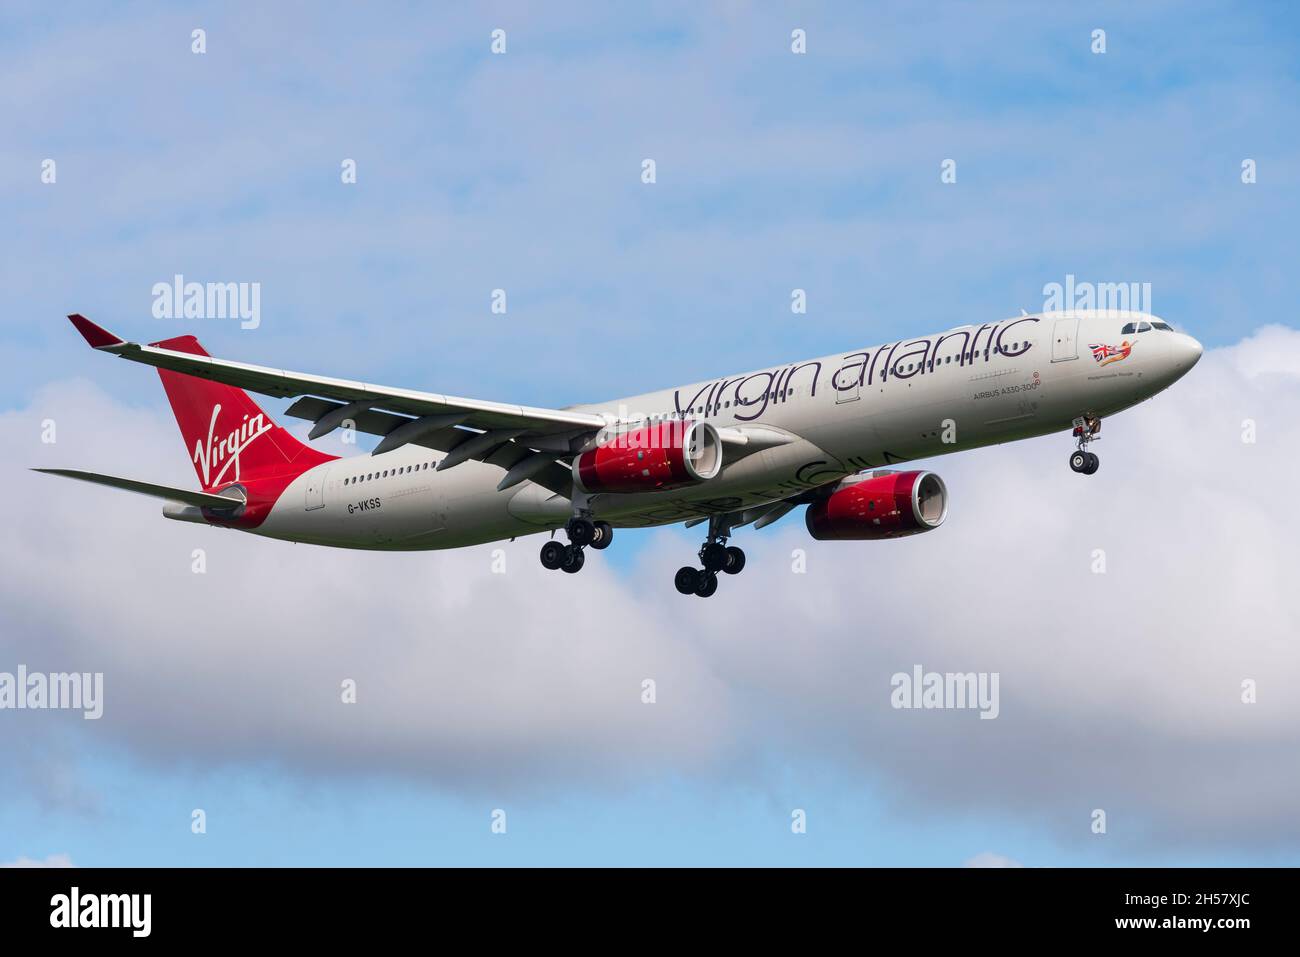 Virgin Atlantic Airways Airbus A330 airliner jet plane G-VKSS on approach to land at London Heathrow Airport, UK. Named Mademoiselle Rouge Stock Photo